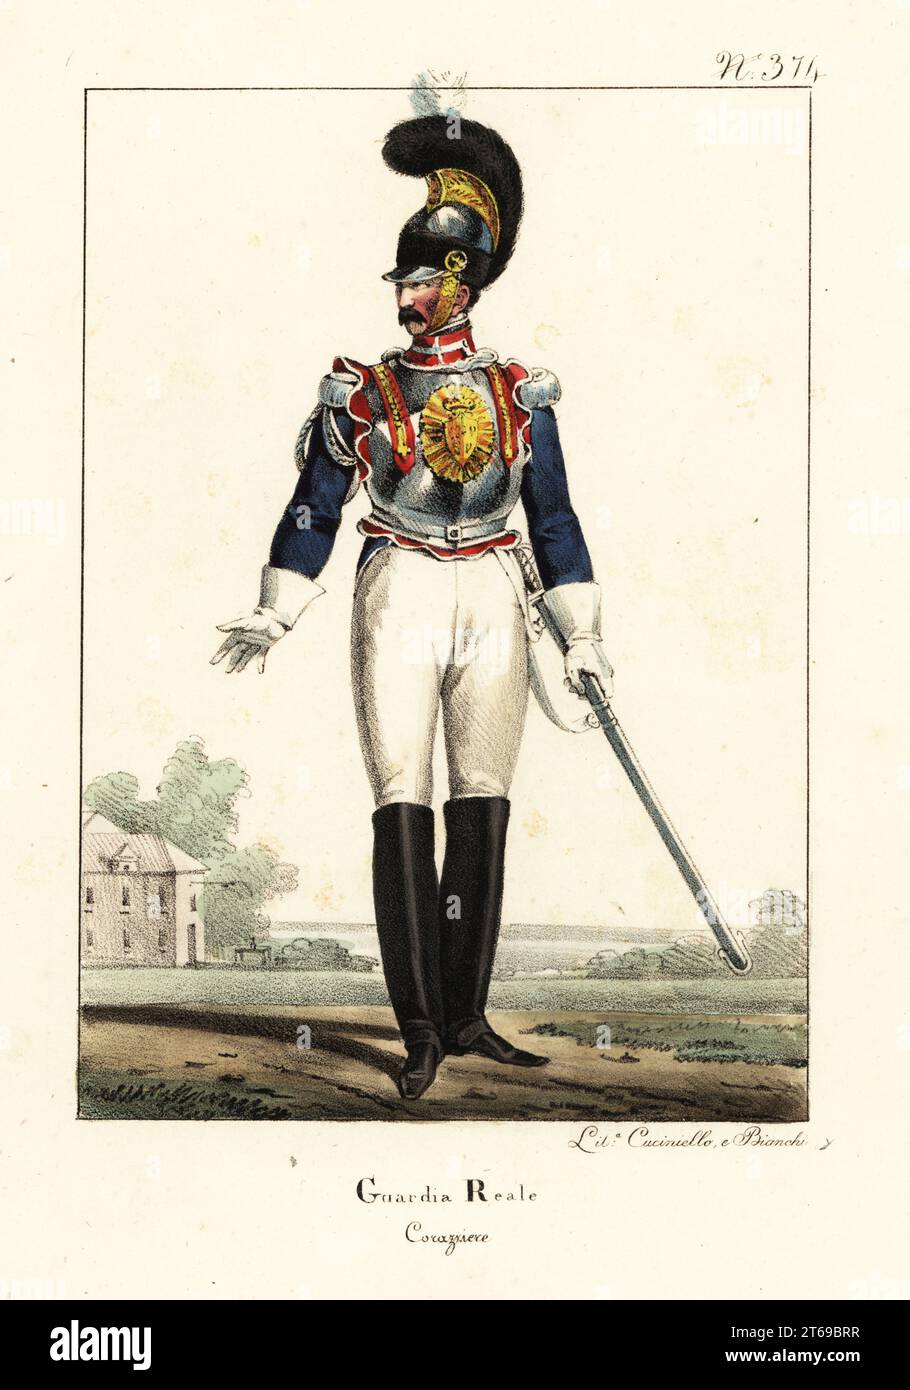 Uniform of a Cuirassier of the French Royal Guard, Bourbon Restoration. In dragoon's helmet with brush, ornate cuirasss, blue coat with silver epaulettes, breeches, boots, armed with sword. Garde Royale, Cuirassier. Handcoloured lithograph by Lorenzo Bianchi and Domenico Cuciniello after Hippolyte Lecomte from Costumi civili e militari della monarchia francese dal 1200 al 1820, Naples, 1825. Italian edition of Lecomtes Civilian and military costumes of the French monarchy from 1200 to 1820. Stock Photo